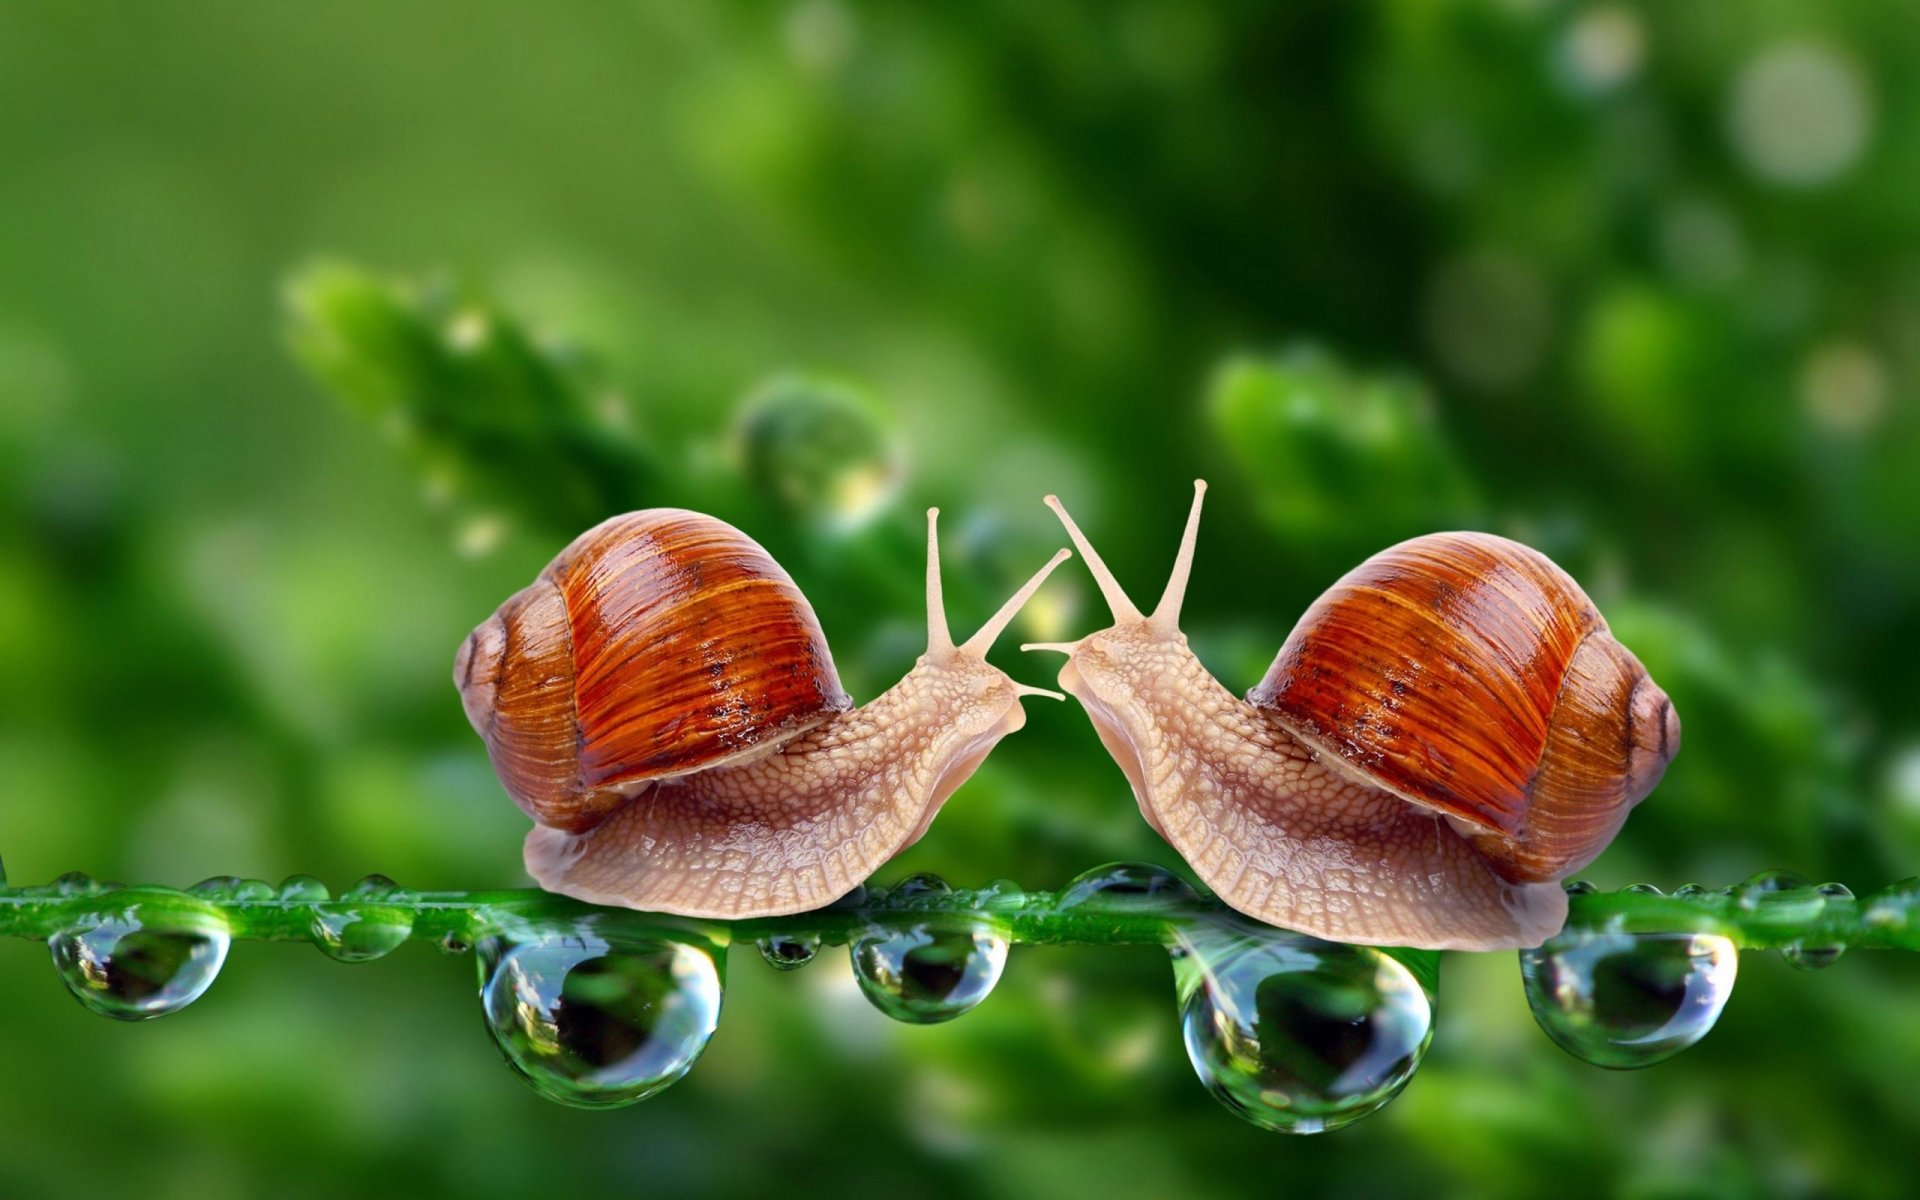 Snail hd papers and backgrounds